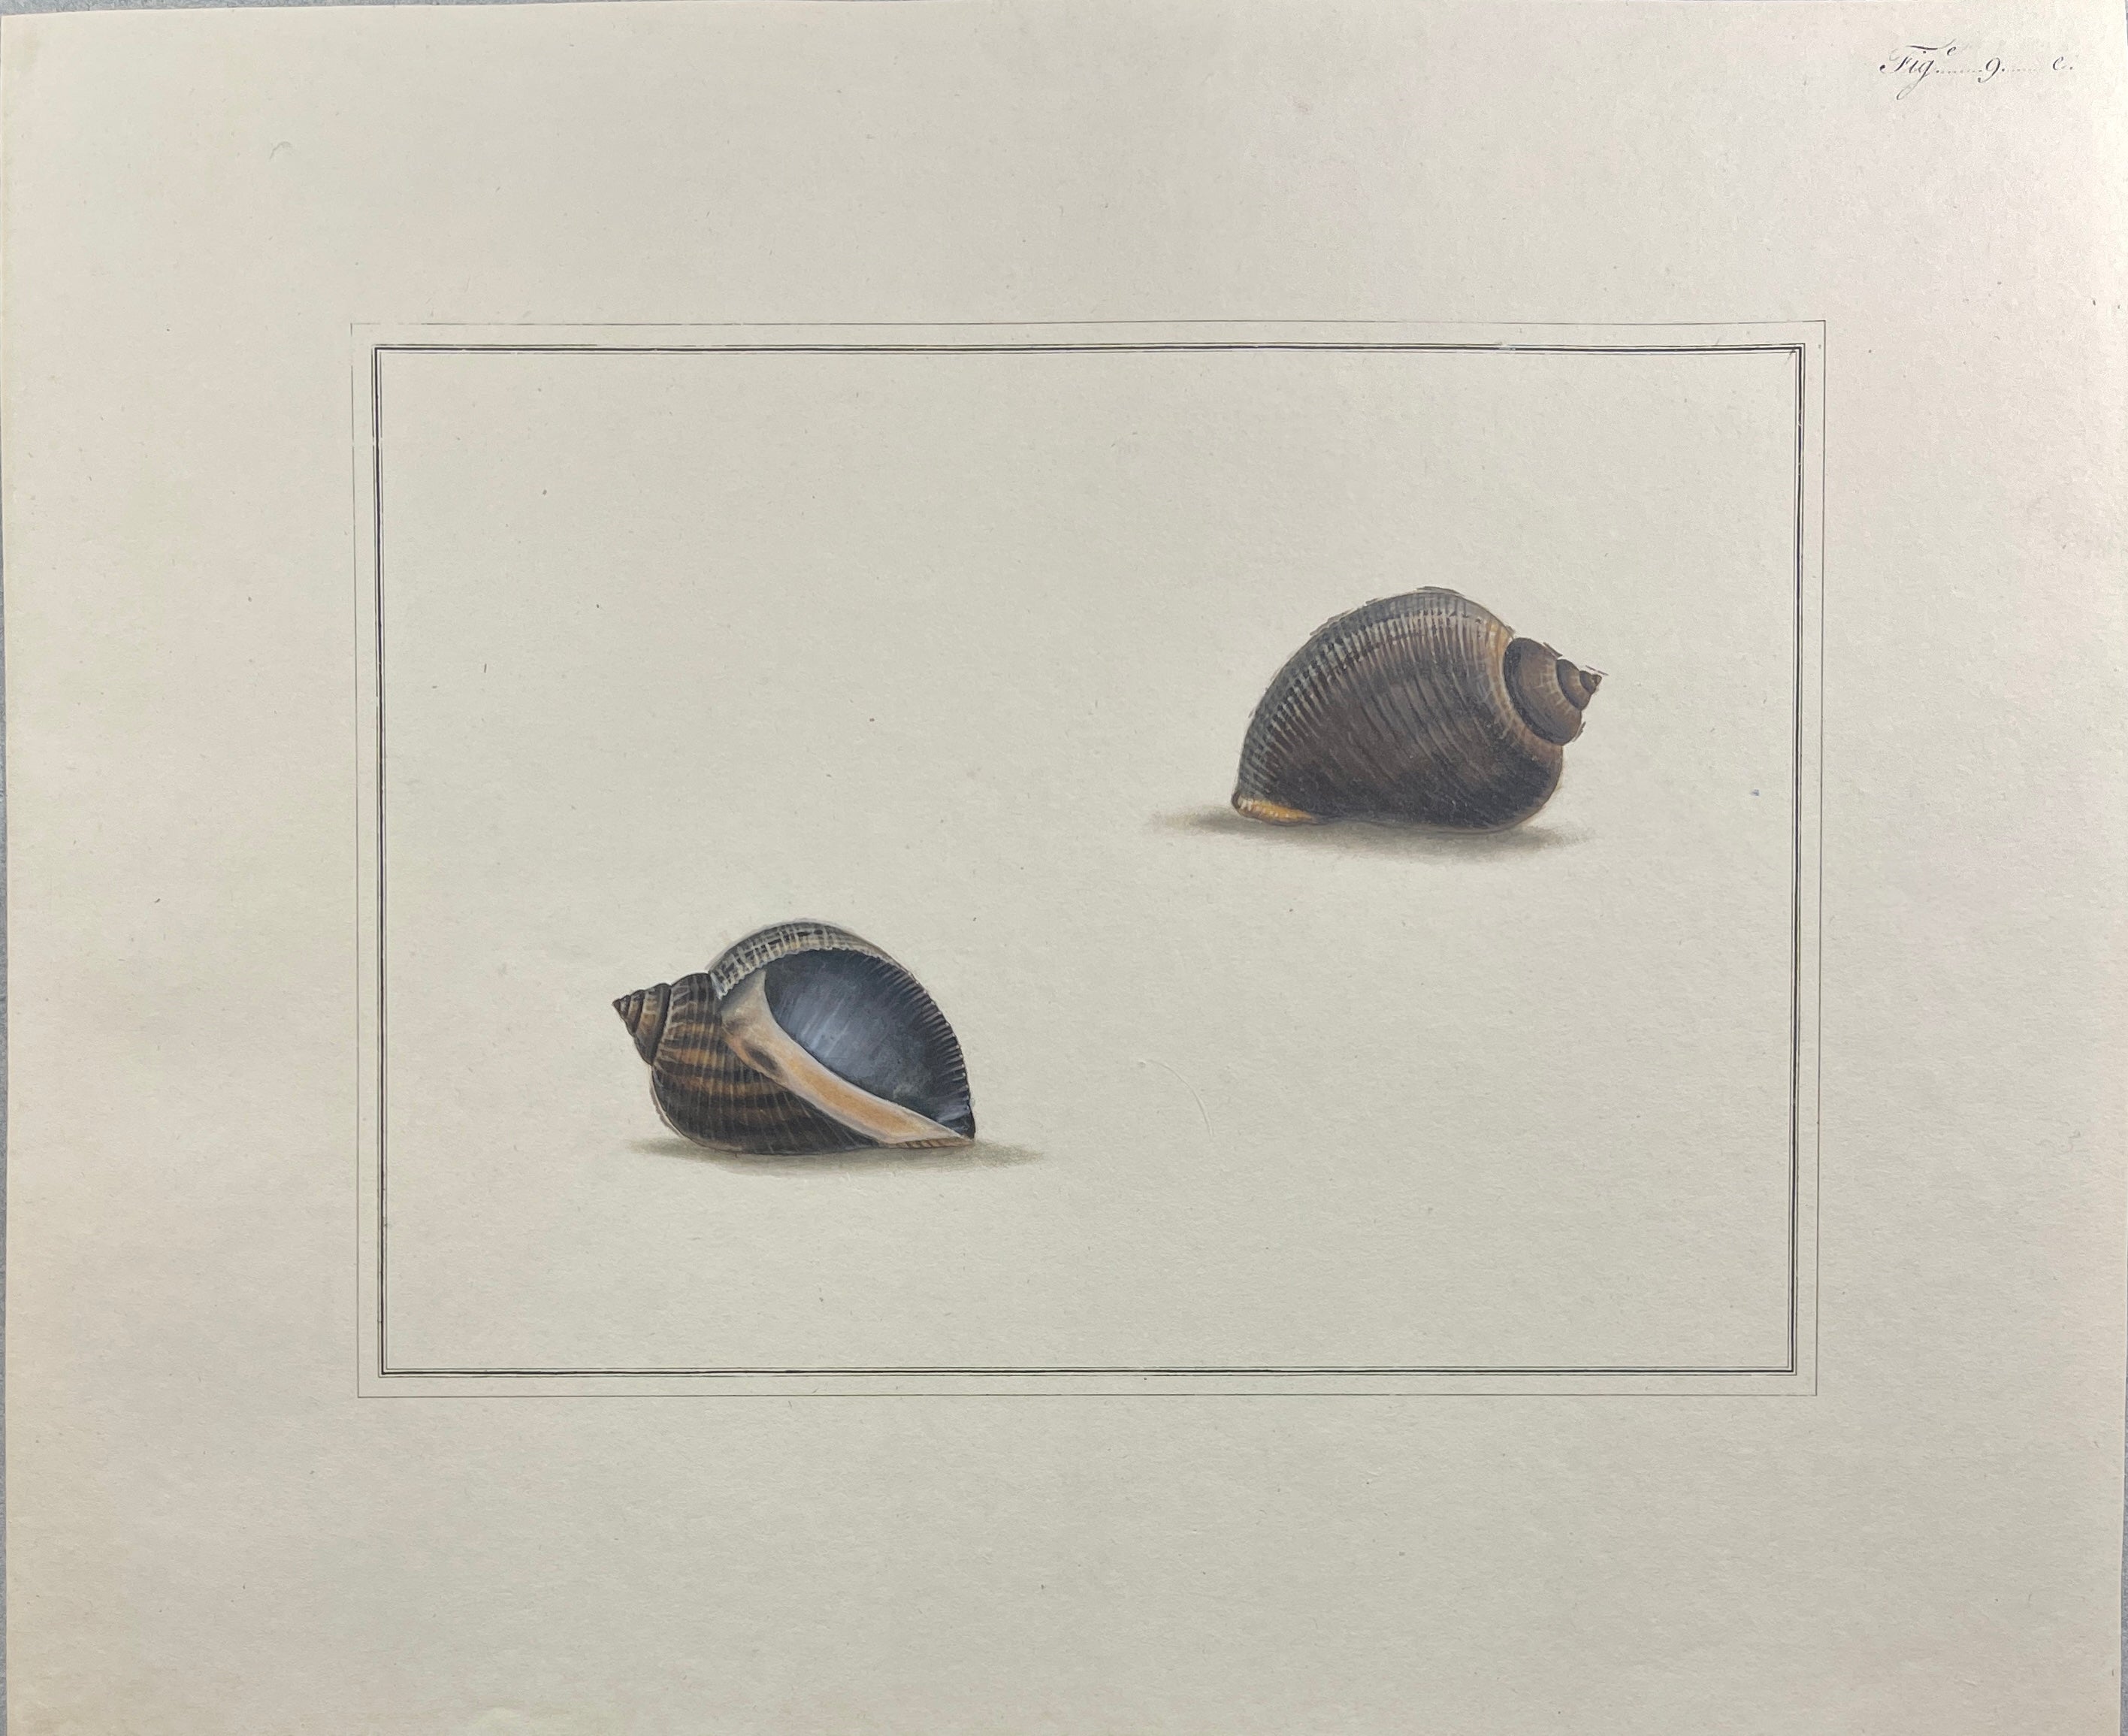 Thomas Martyn 1784 Original Scoop Buccin Shell Print Plate 9 - Found at New Zealand - Hand-Colored Tipped-In Engraving at Adirondack Retro